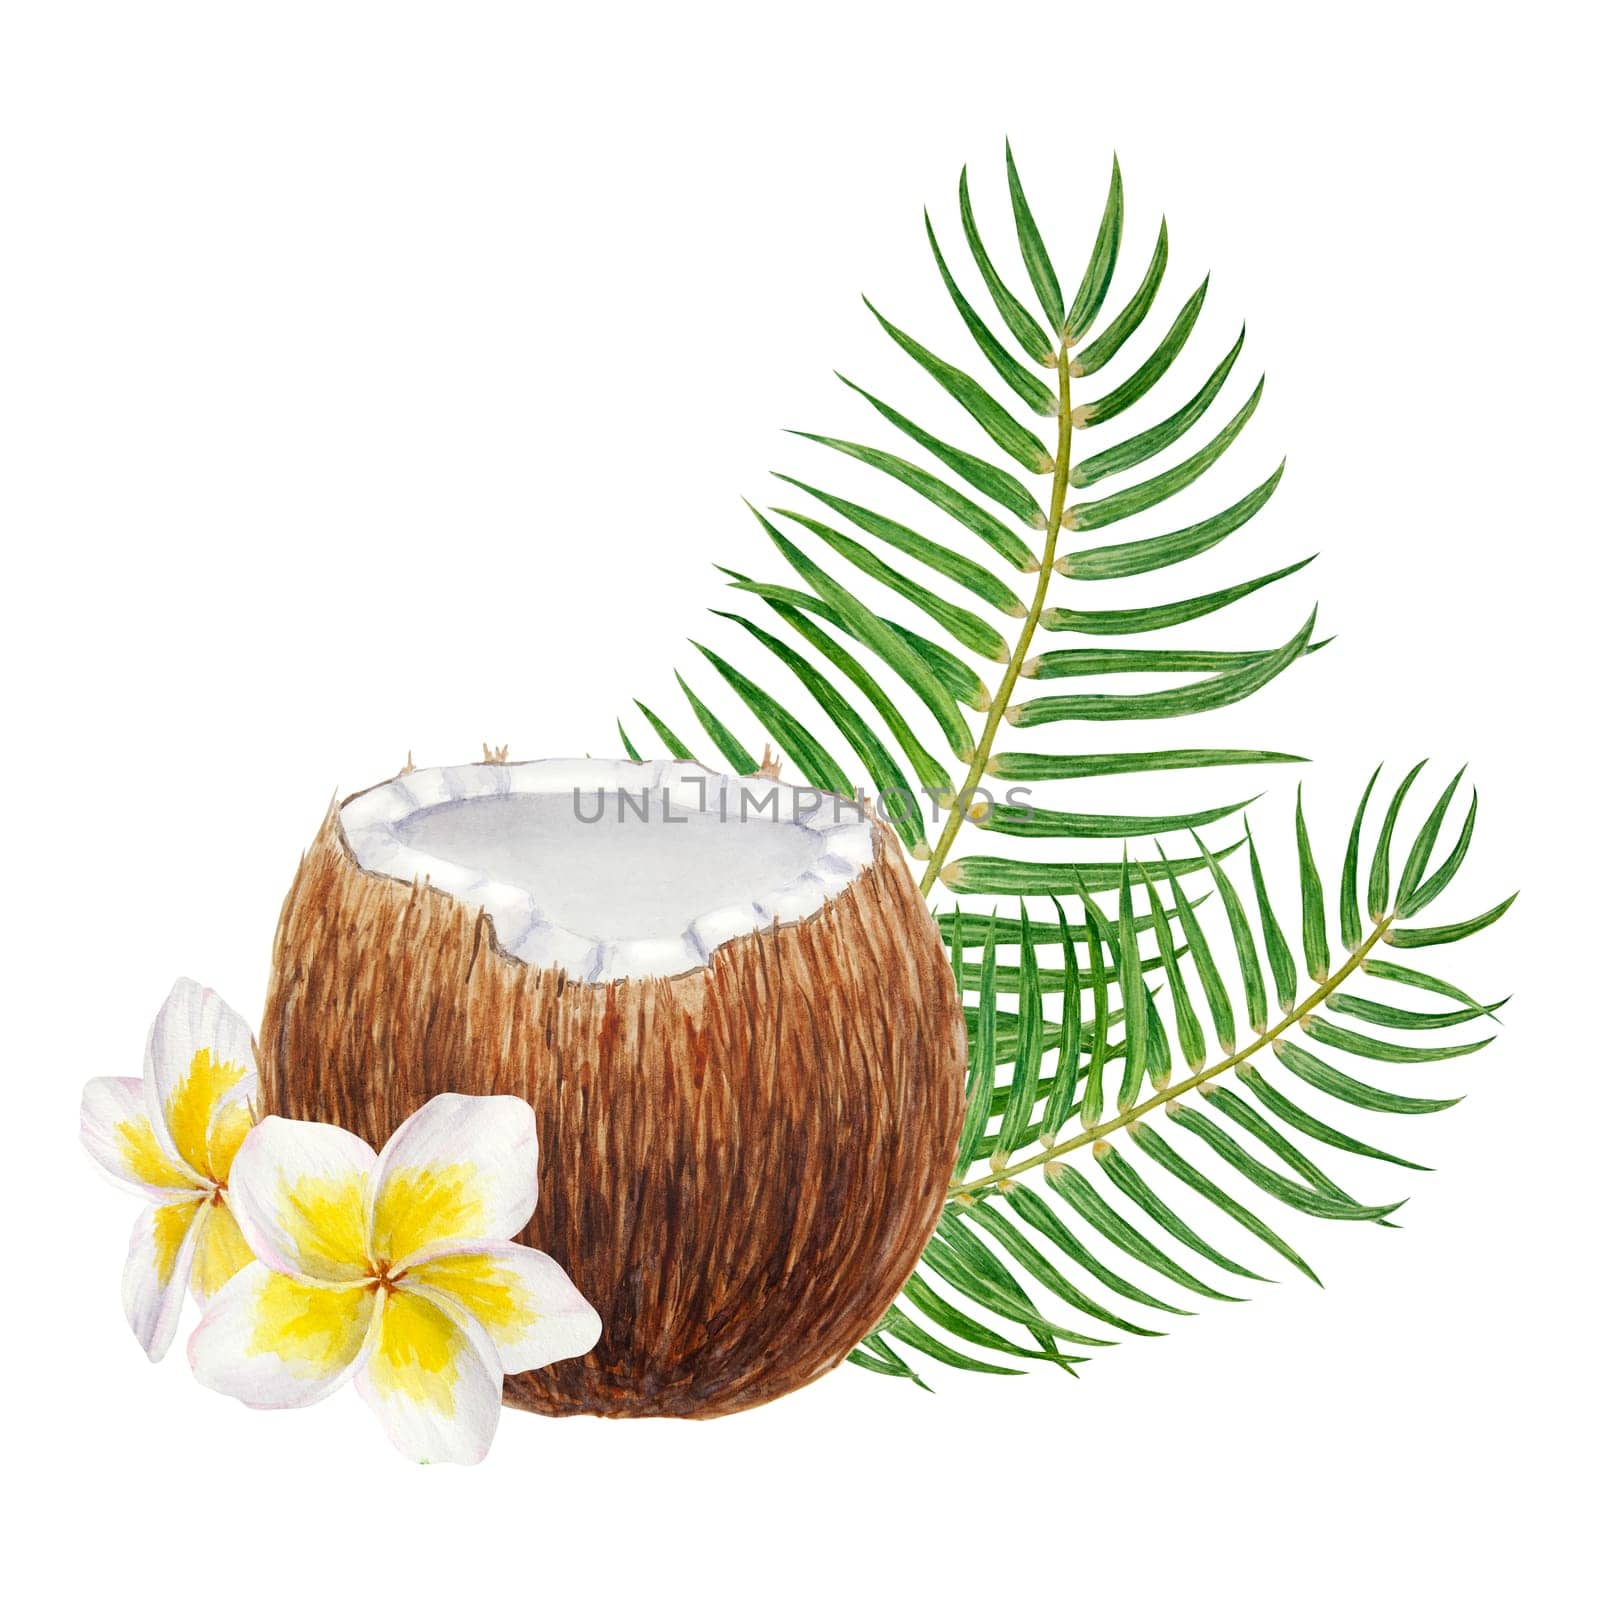 White frangipani, green palm leaves and half a broken coconut illustration. Watercolor hand drawn clip art of exotic fruit. Tropical painting for wedding invitations, spa, beauty prints, travel guides